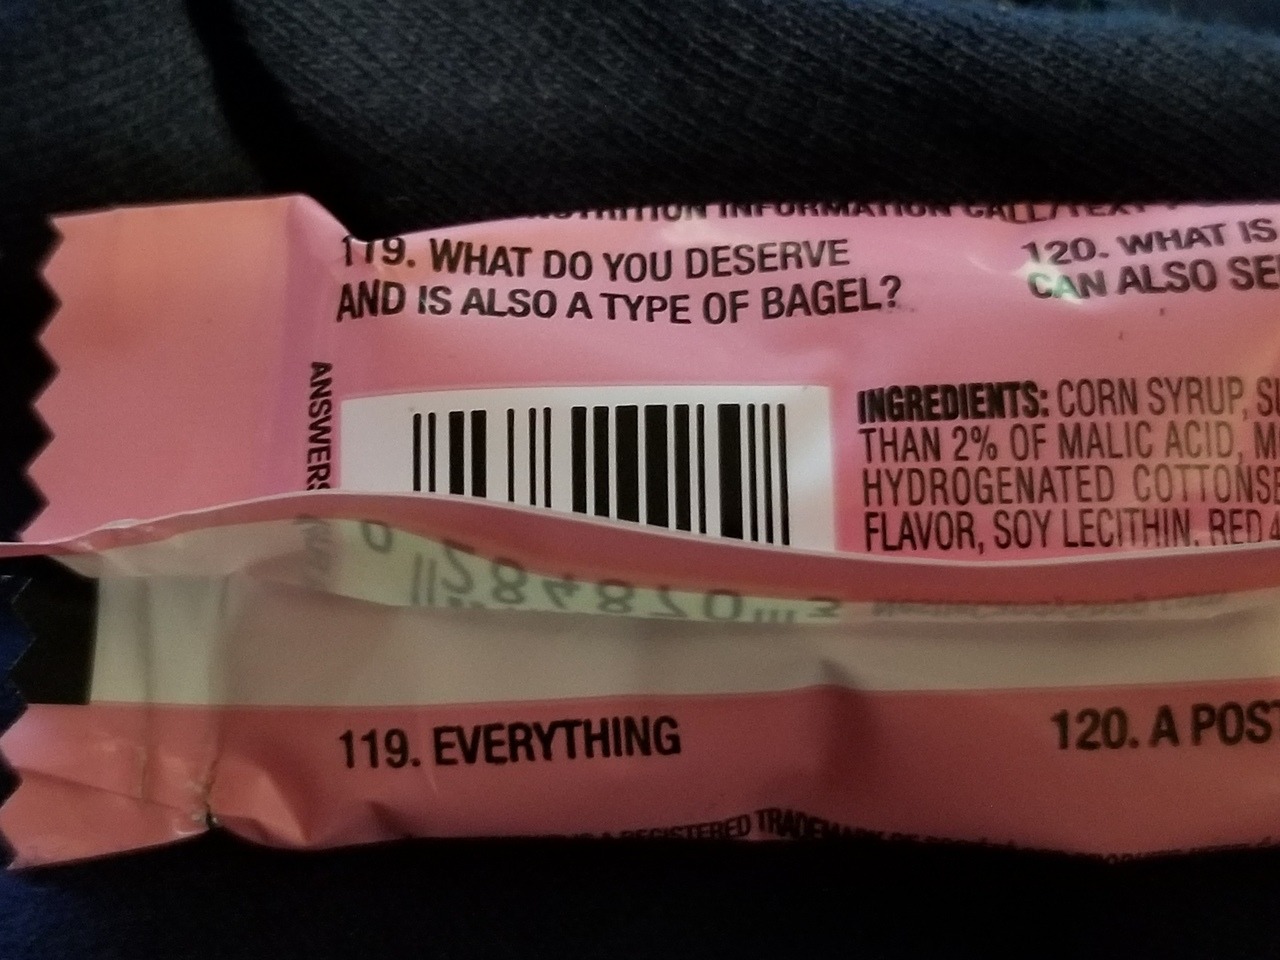 wholesome memes - Or Information 119. What Do You Deserve And Is Also A Type Of Bagel? 120. What Is Can Also Se Answer Ingredients Corn Syrup, Si Than 2% Of Malic Acid, M Hydrogenated Cottonse Flavor, Soy Lecithin. Red 4 119. Everything 120. A Pos Stereo 